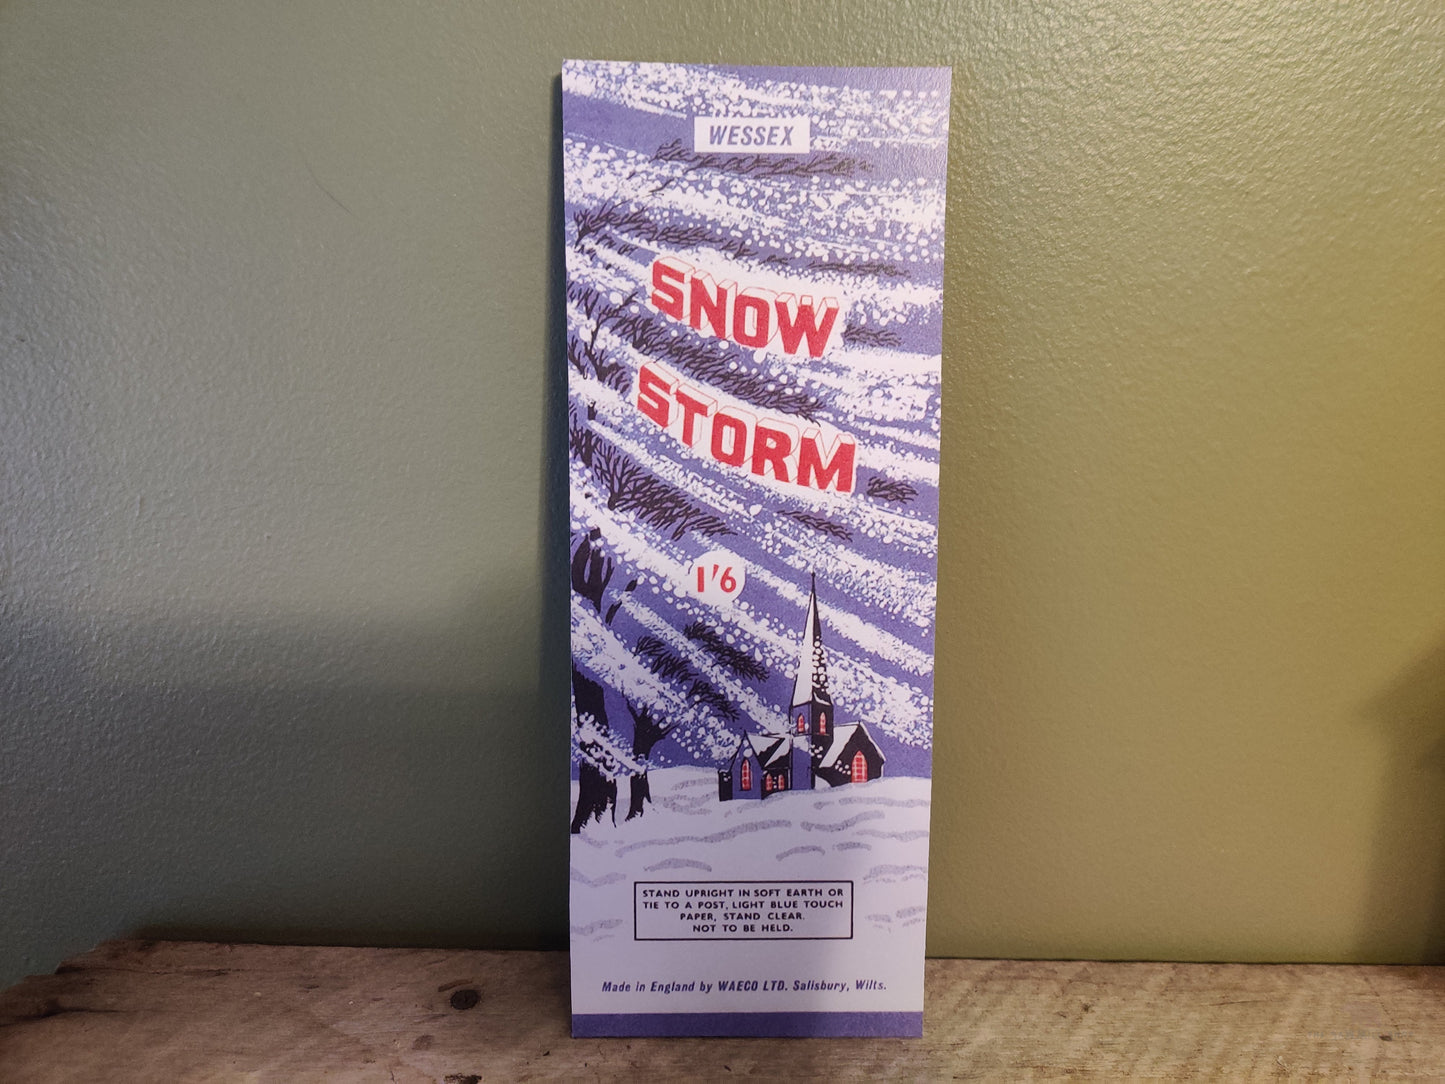 Wessex Snow Storm Firecrackers Fourth of July Wood Cutout